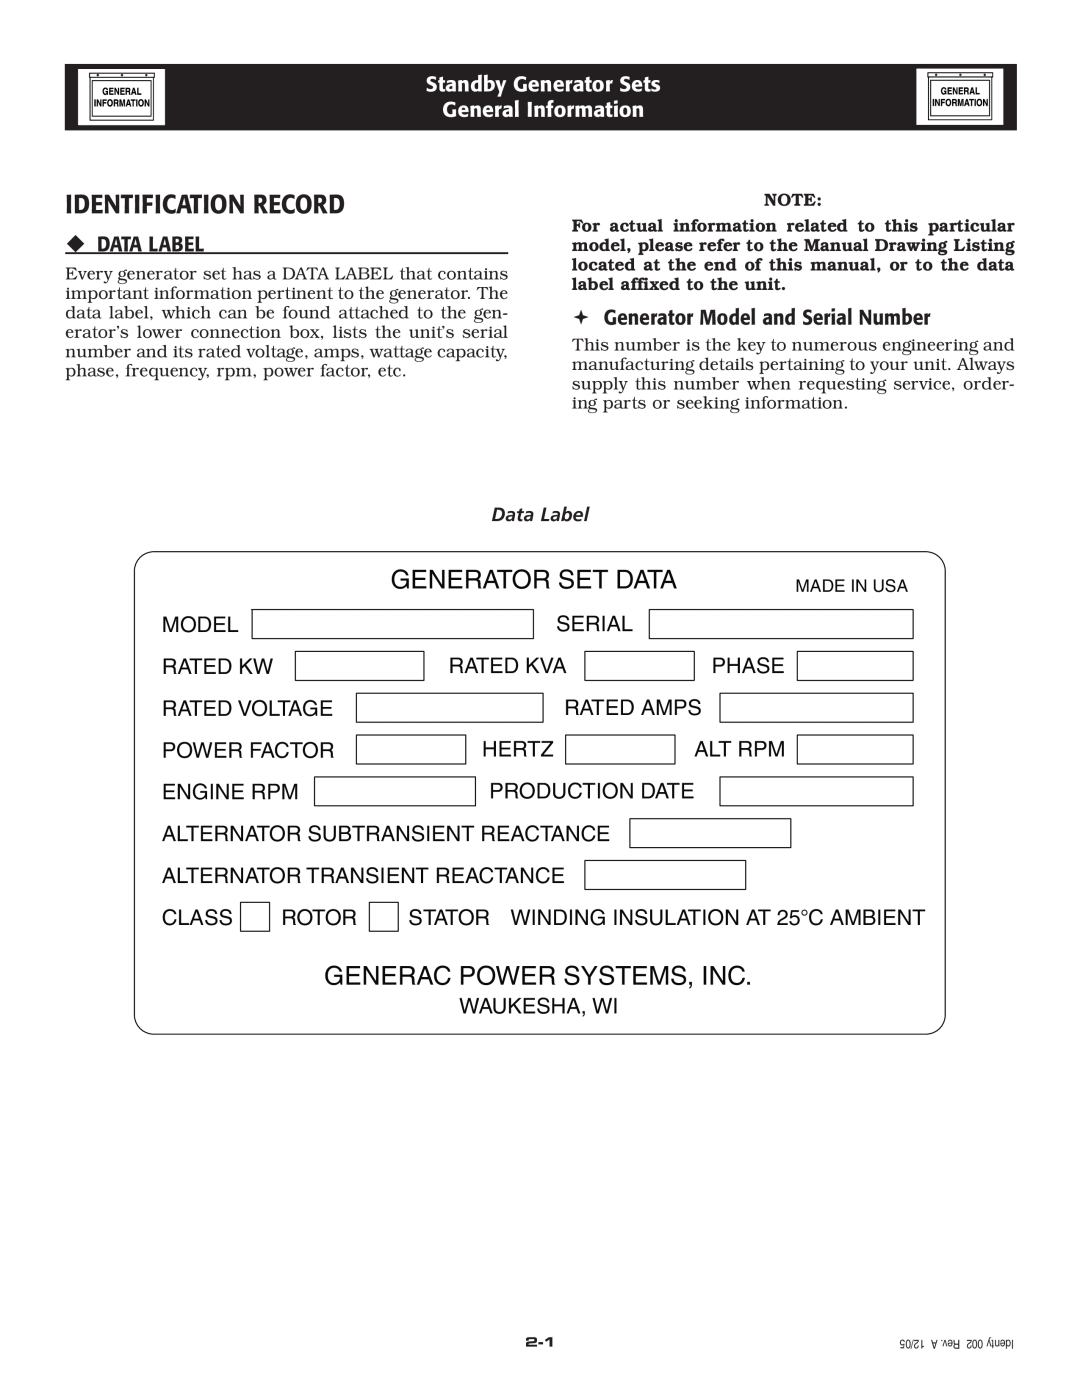 Generac Power Systems 005324-0, 005325-0 Identification Record, Standby Generator Sets General Information, ‹ Data Label 